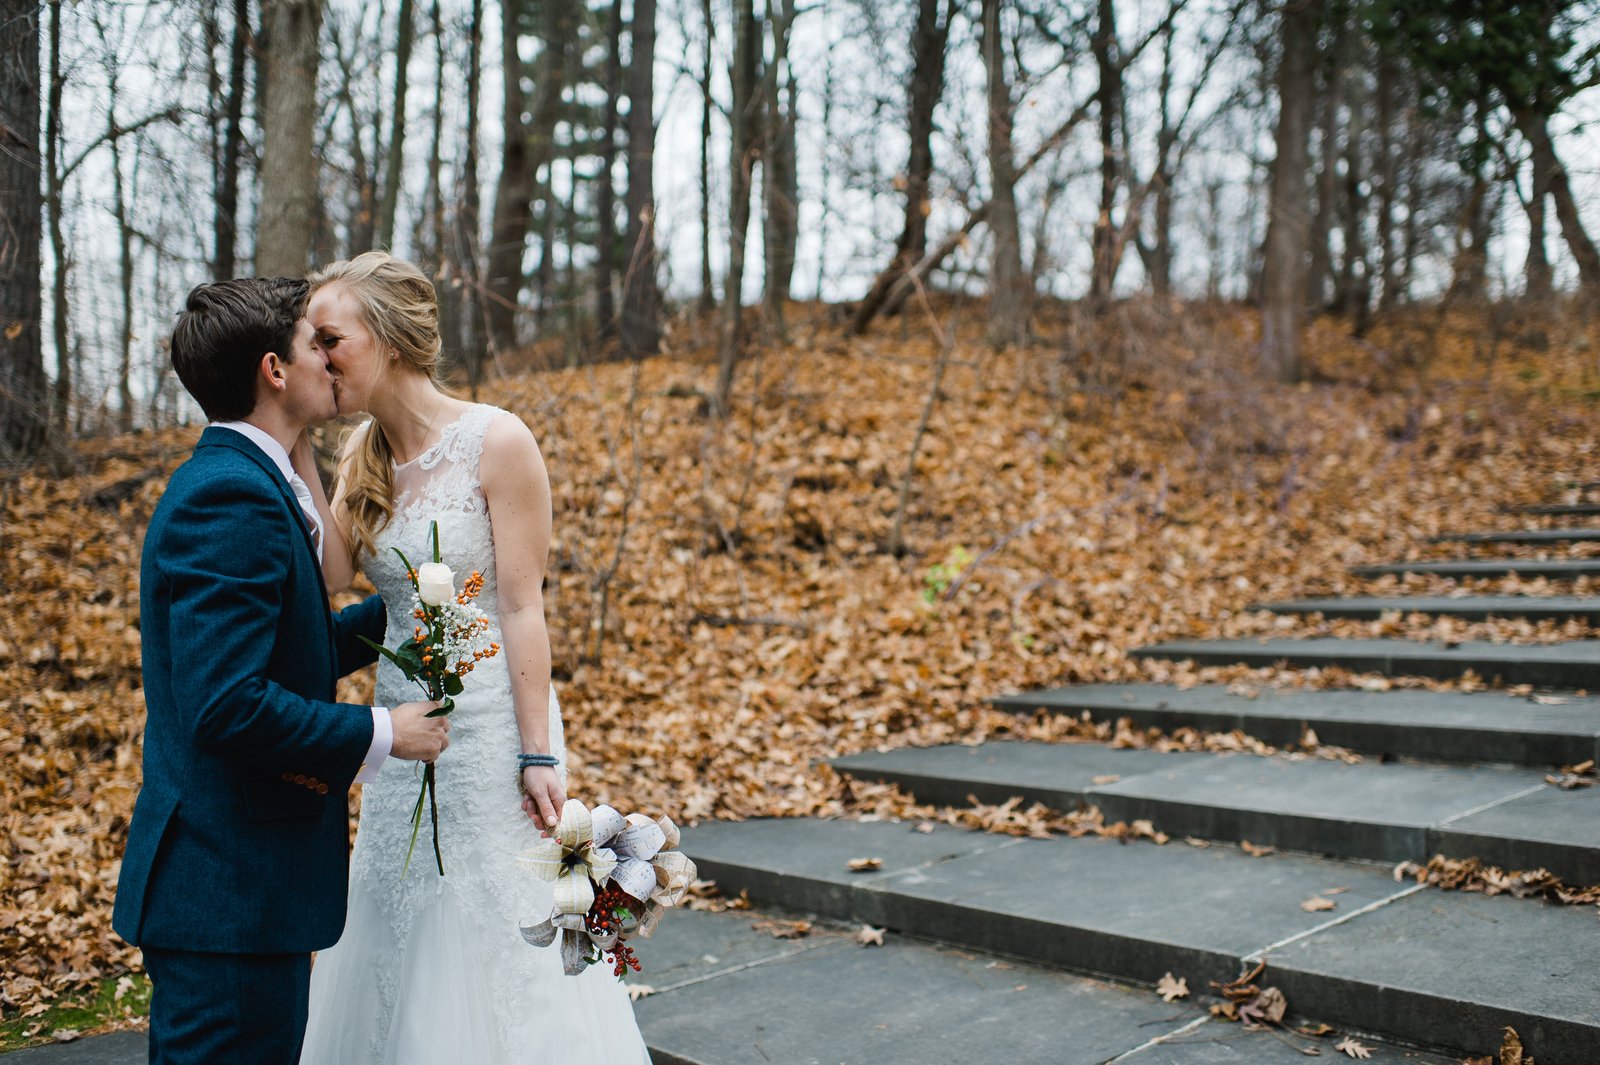 the wedding day reveal at queenston heights in niagara